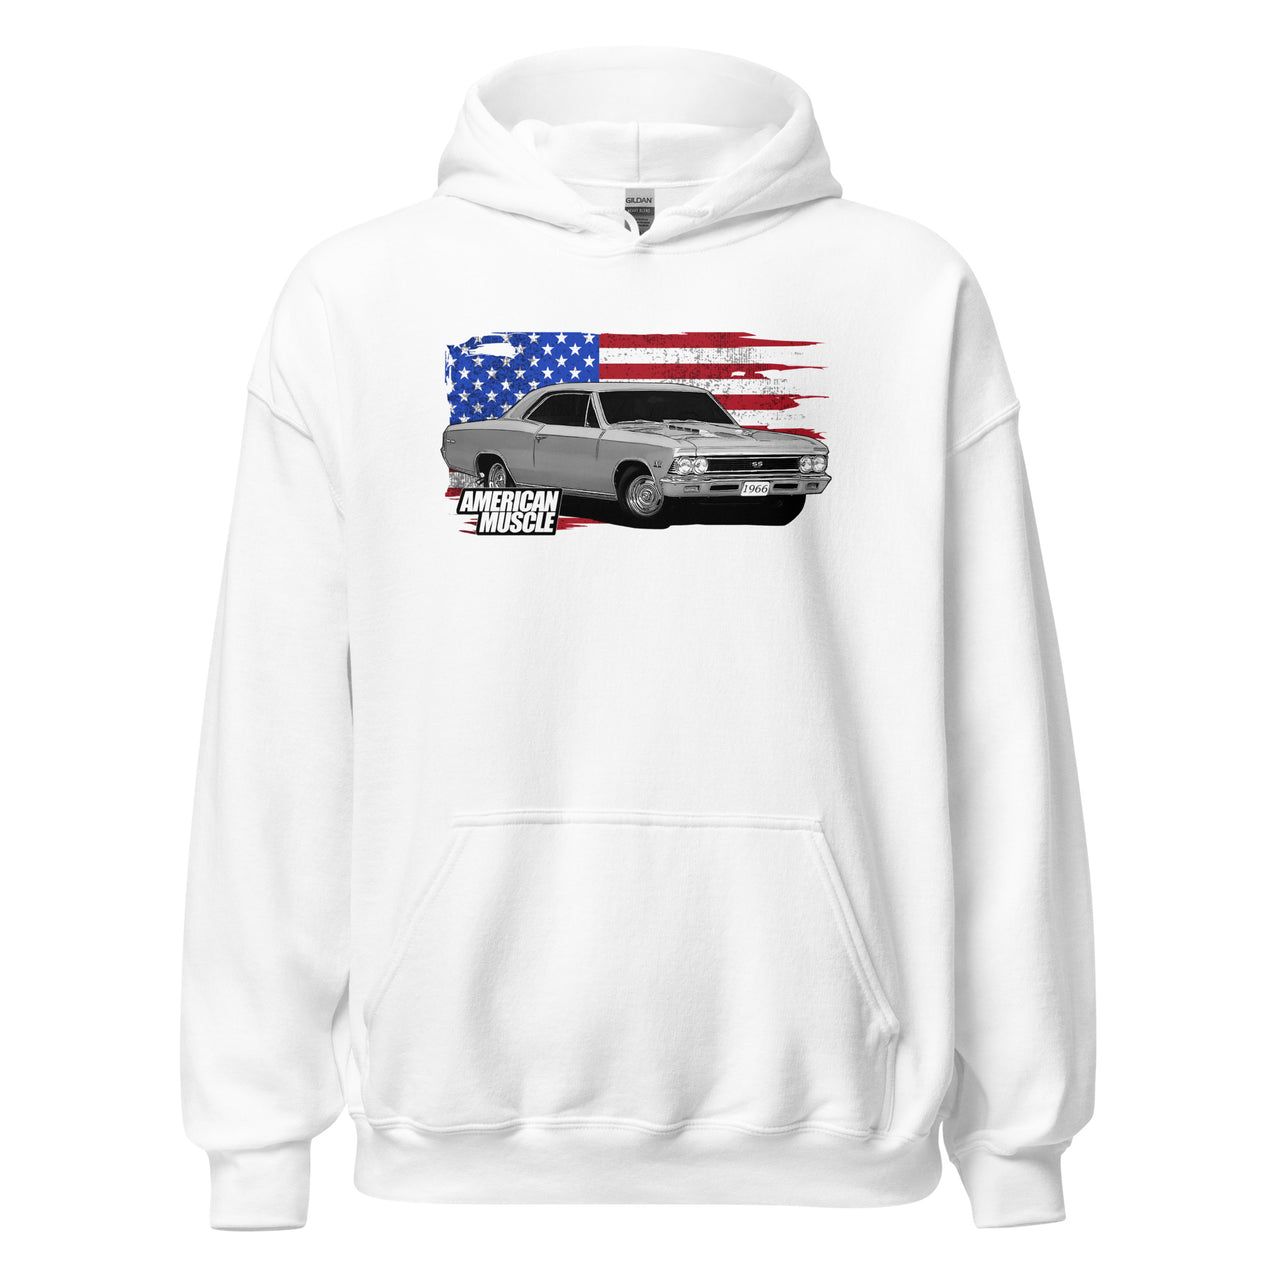 1966 Chevelle Car Hoodie Sweatshirt With American Flag design - in white